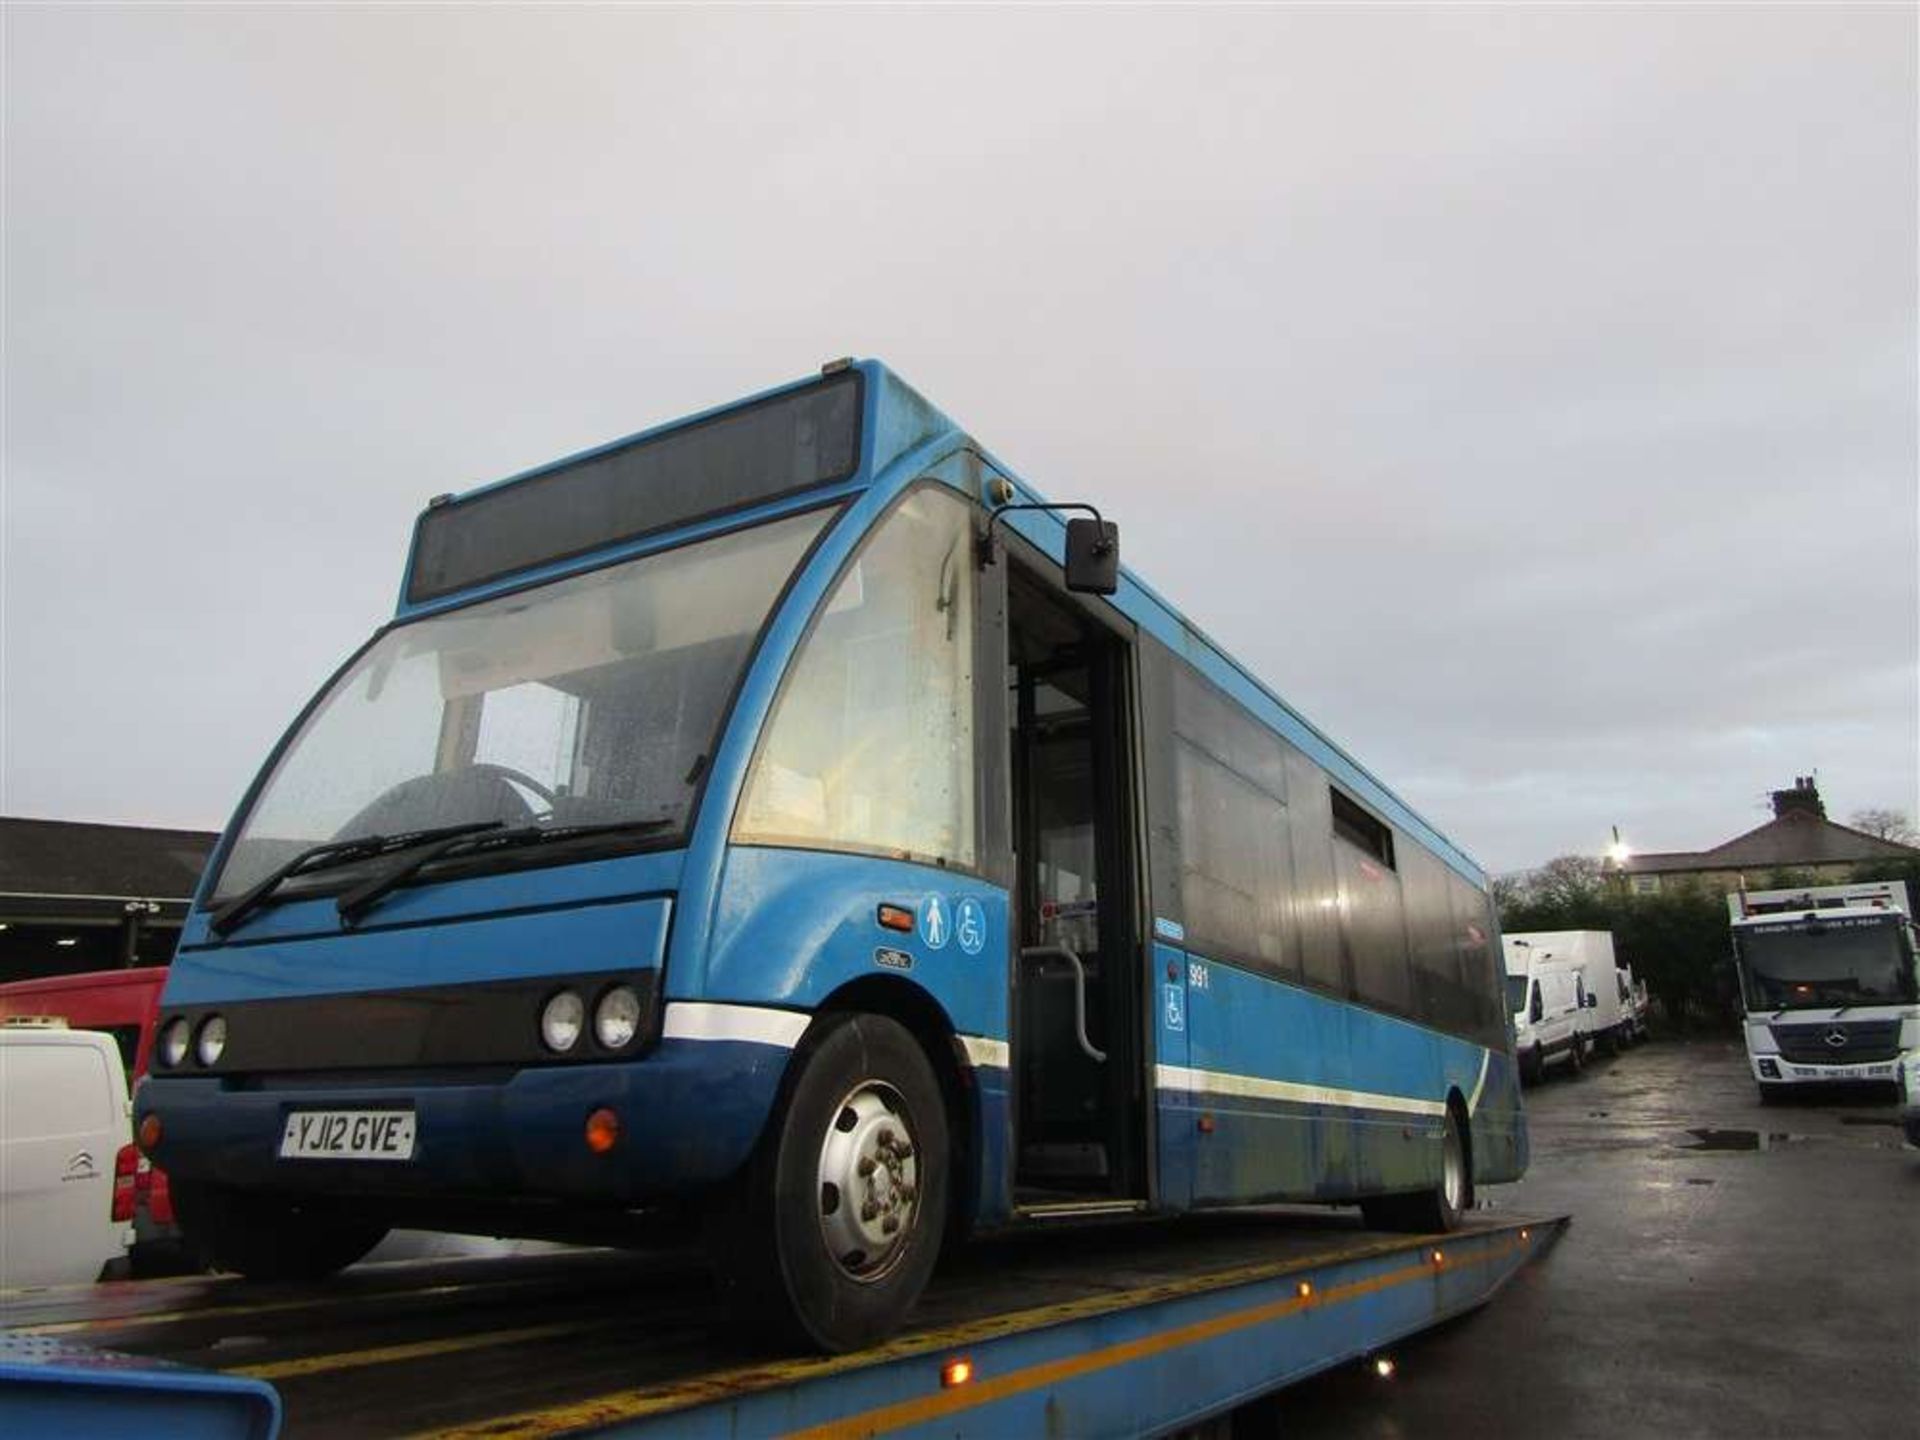 2012 12 reg Optare Solo M950 Electric Bus (Believed to be Running But Needs Charging) - Image 2 of 6